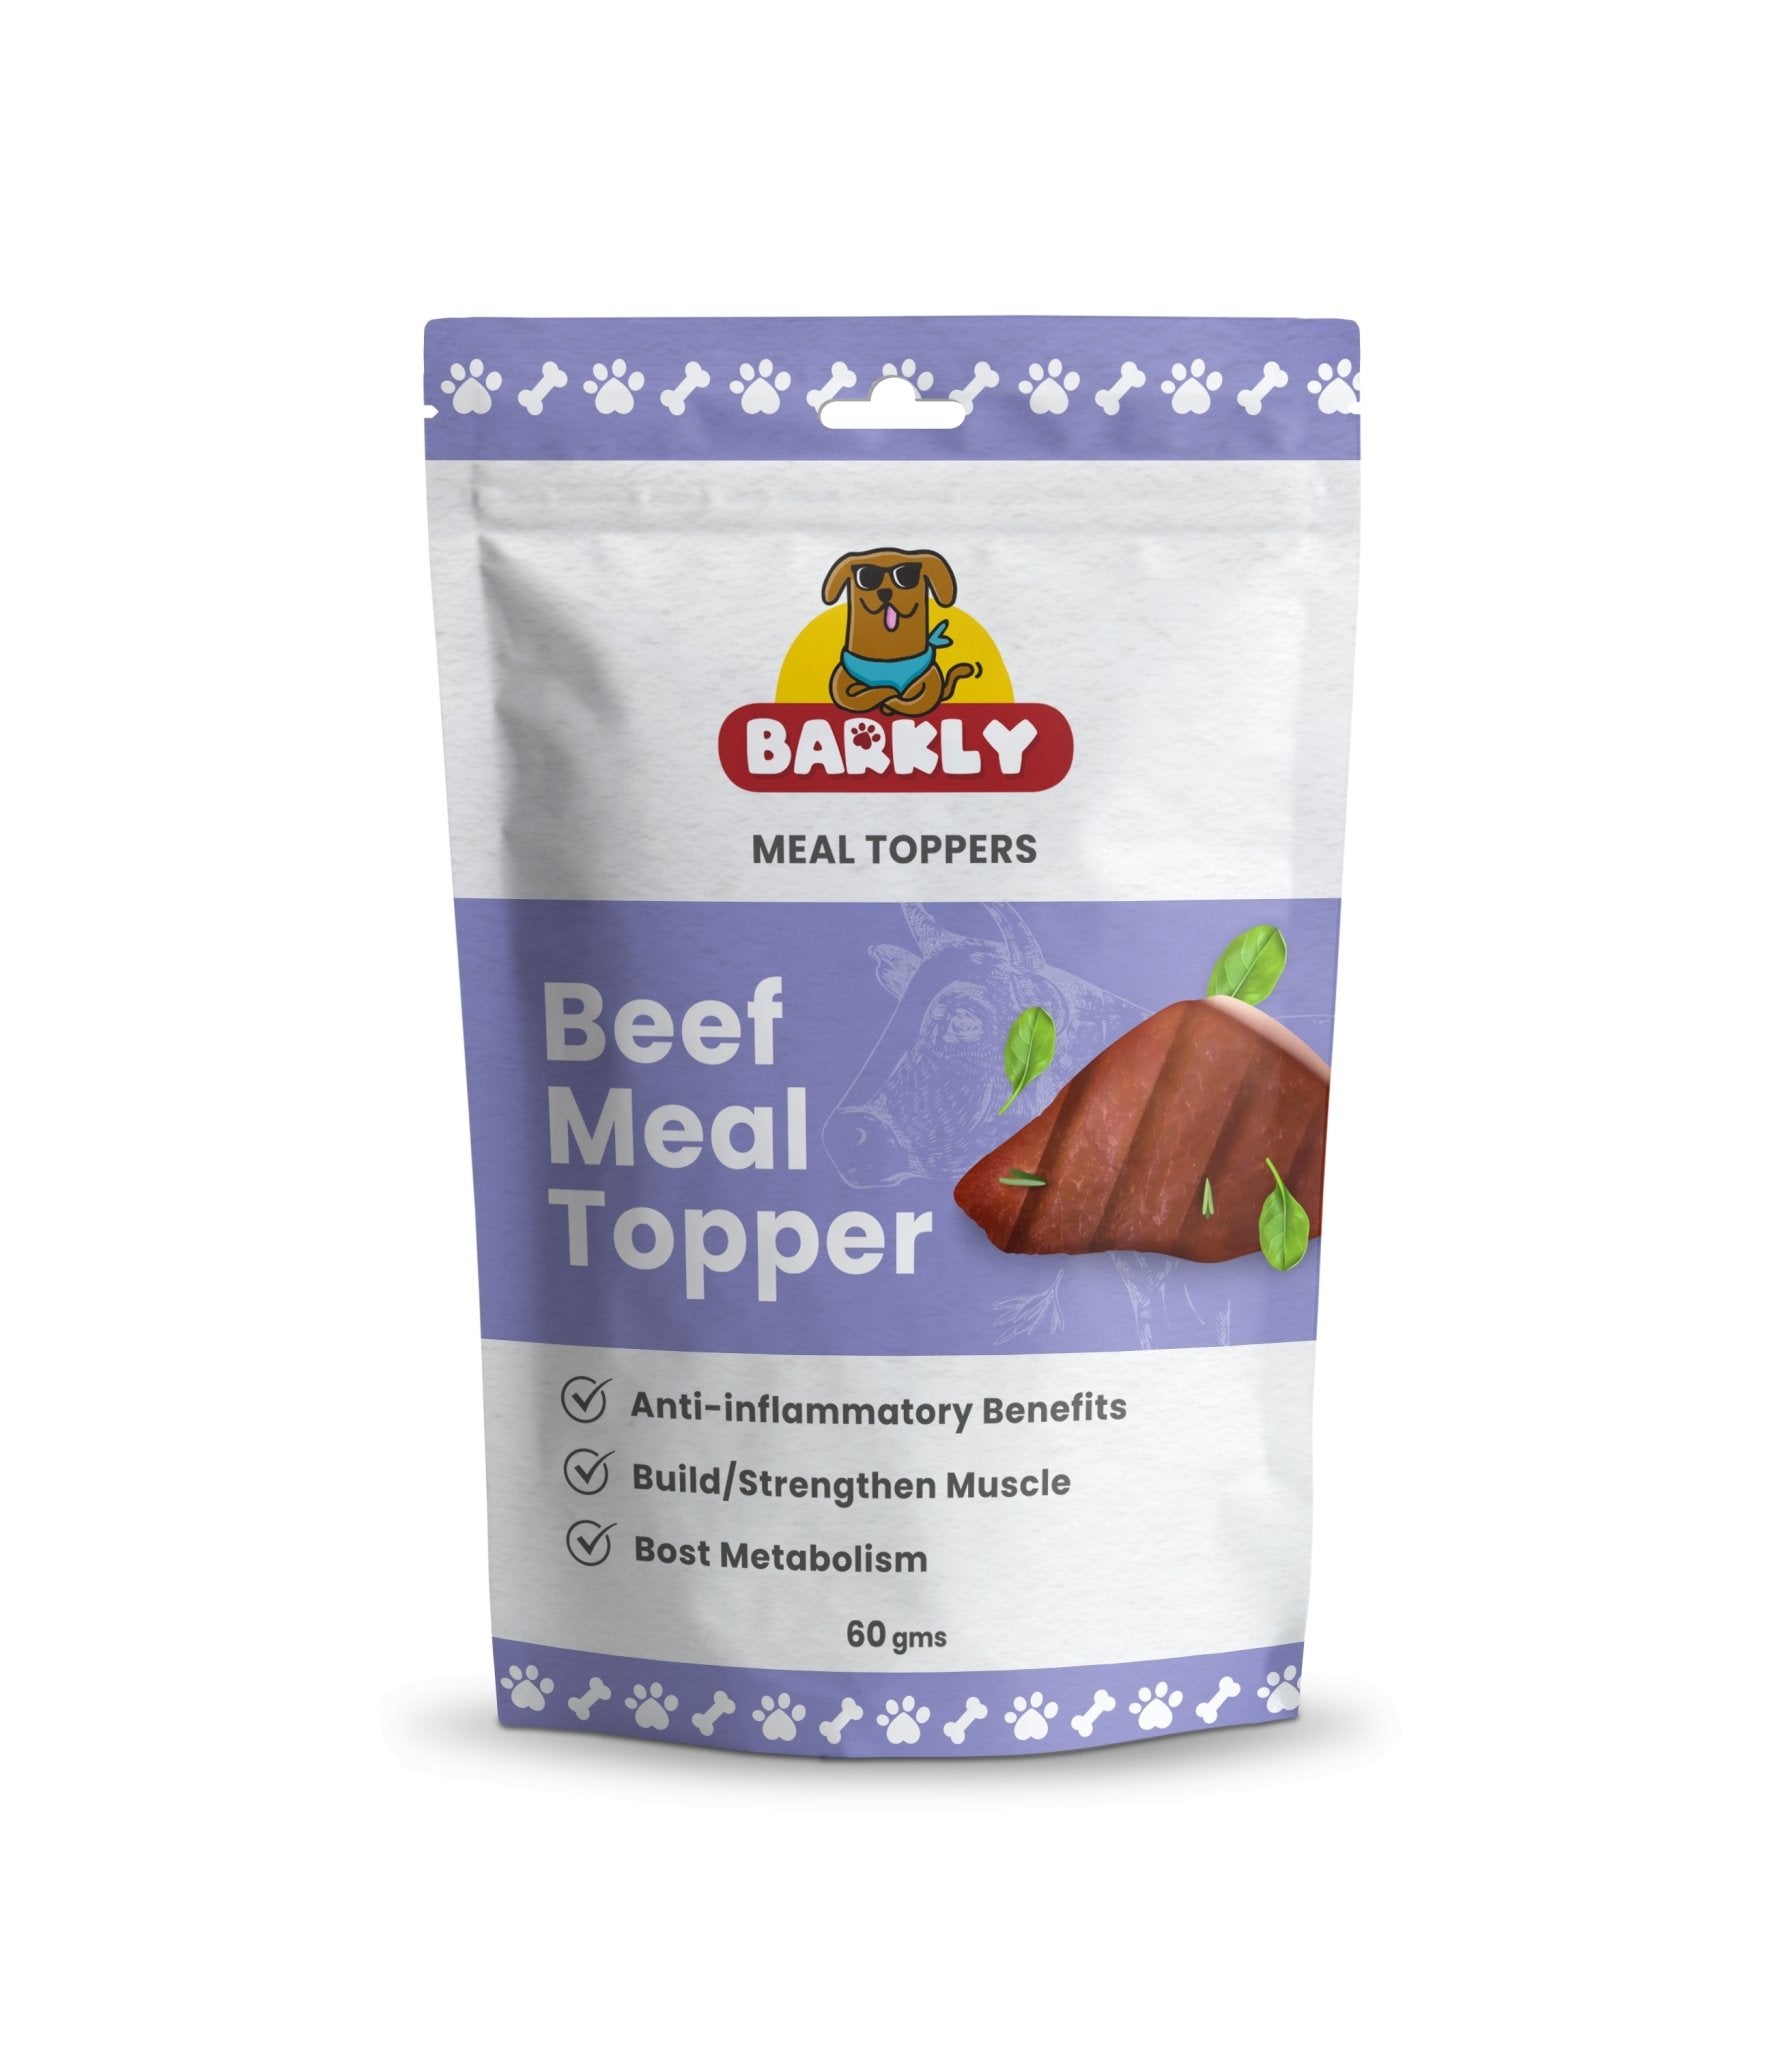 Barkly's Beef Meal Topper for dogs